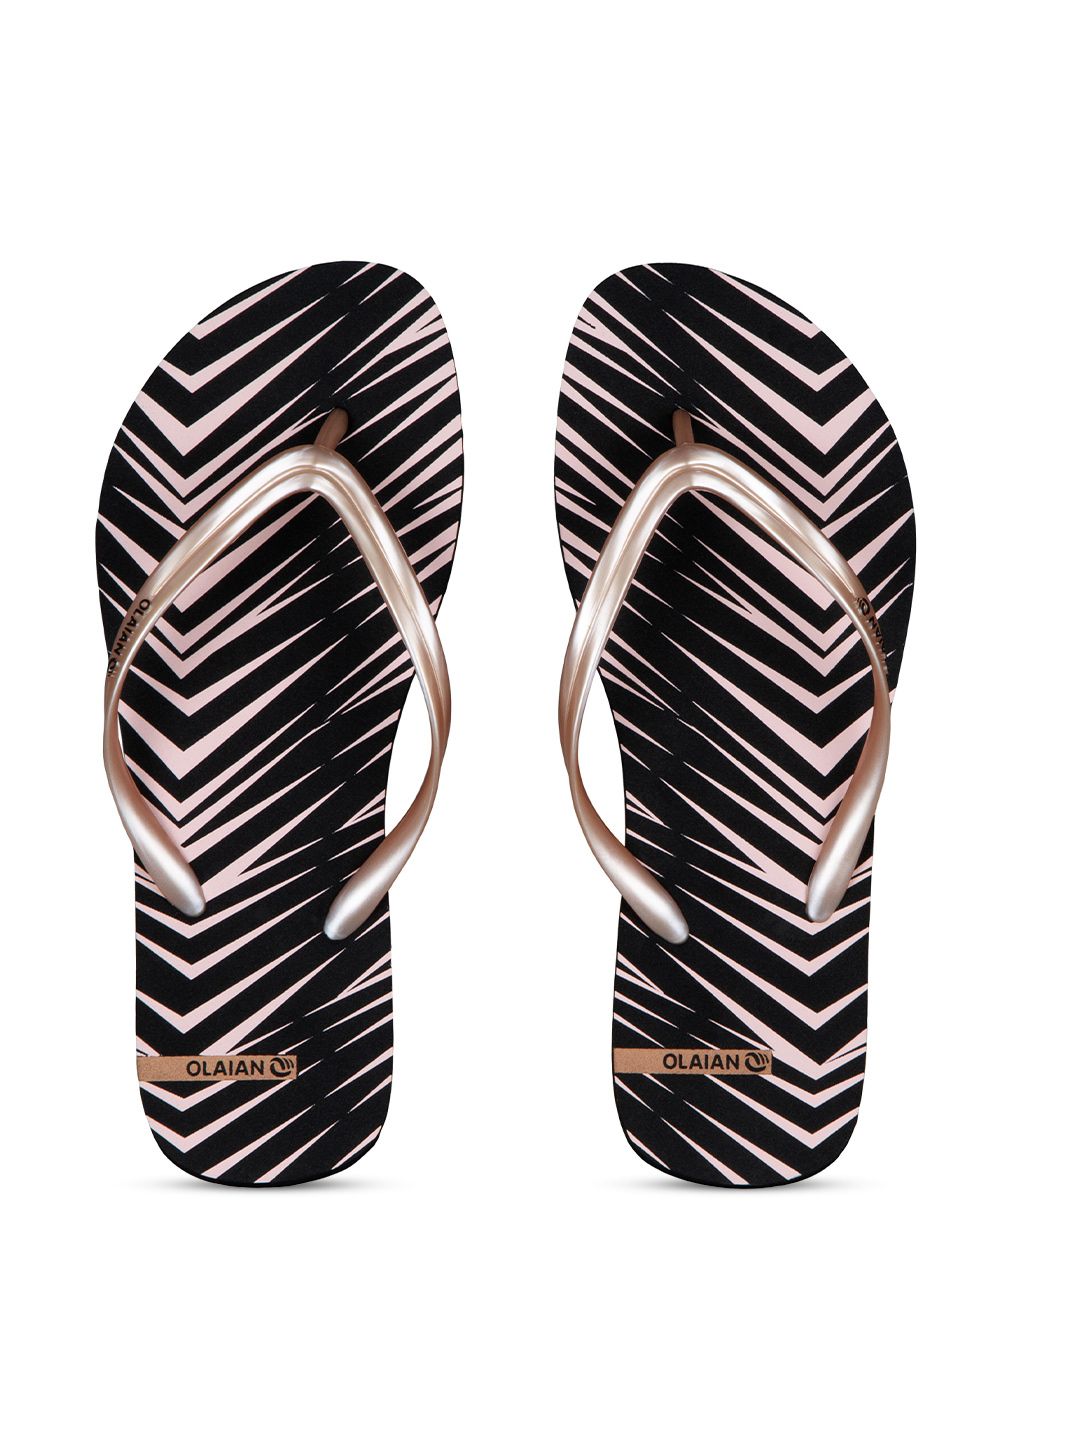 OLAIAN By Decathlon Women Black & Pink Printed Rubber Thong Flip-Flops Price in India